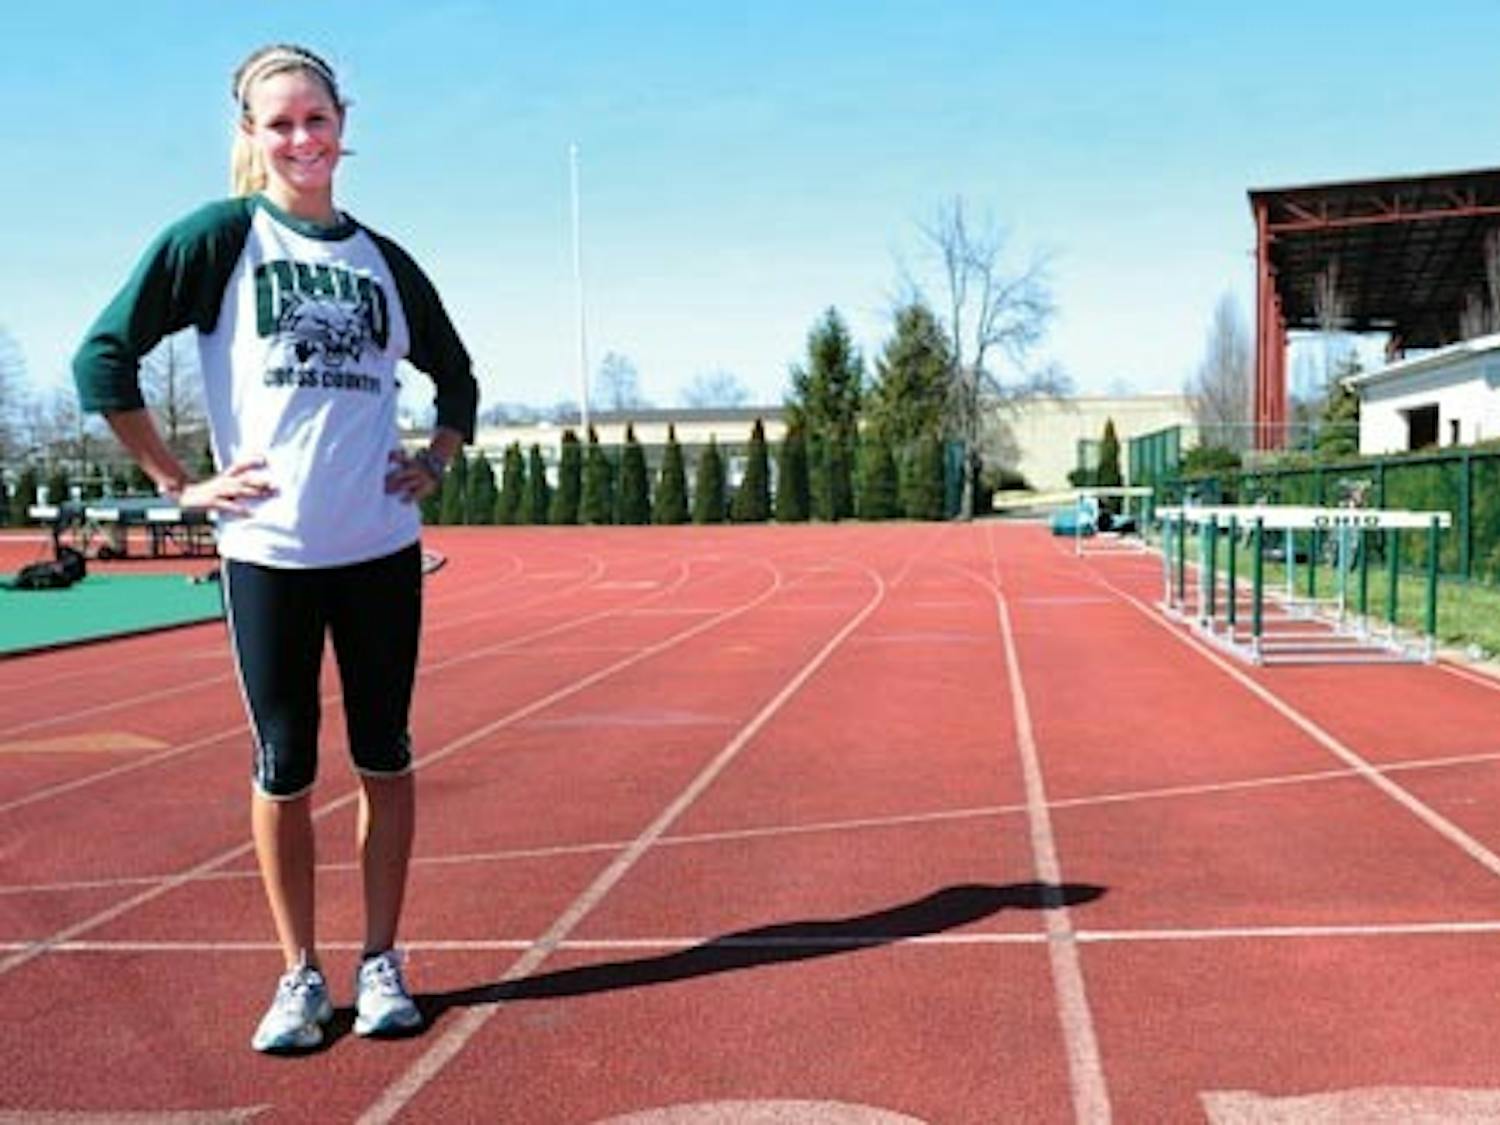 Track & Field: Cross-country runner goes the distance, keeps going  